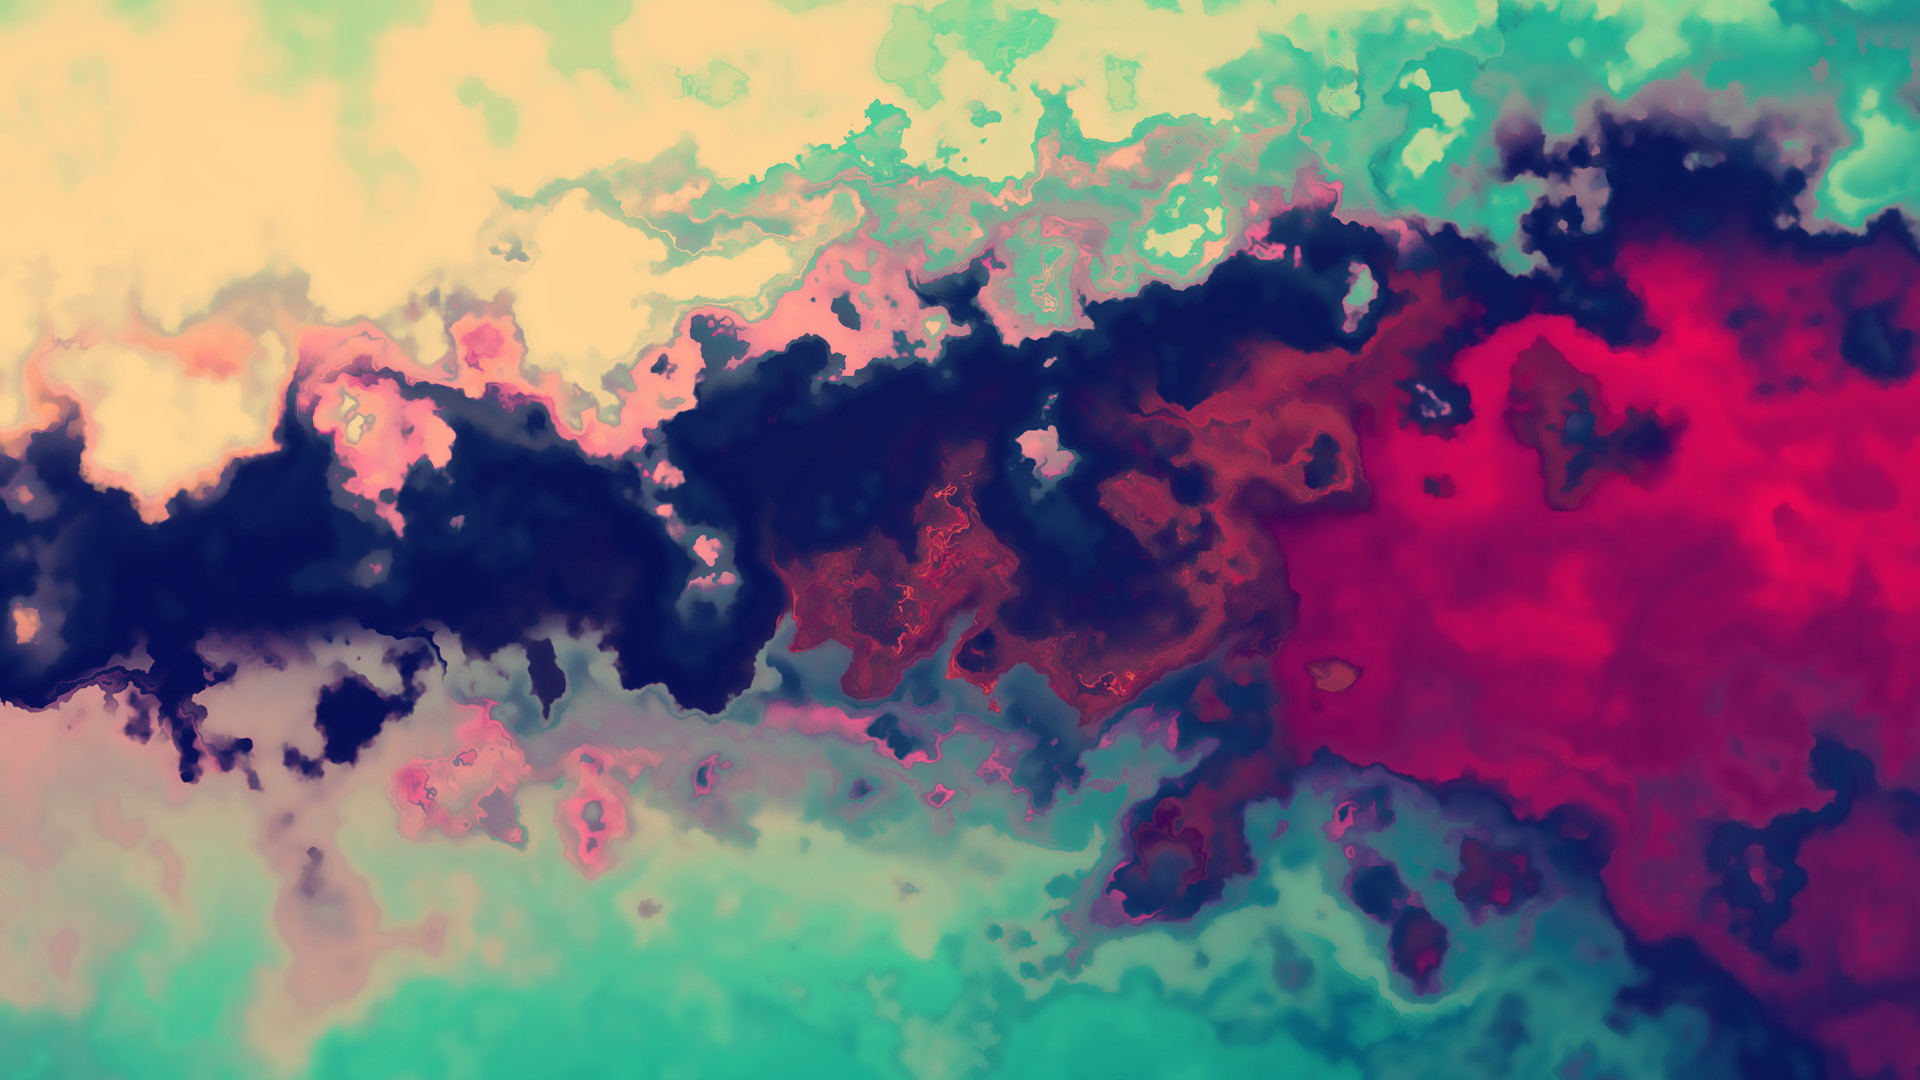 Psychedelic HD Wallpaper Widescreen 1920x1080 (68+ images)